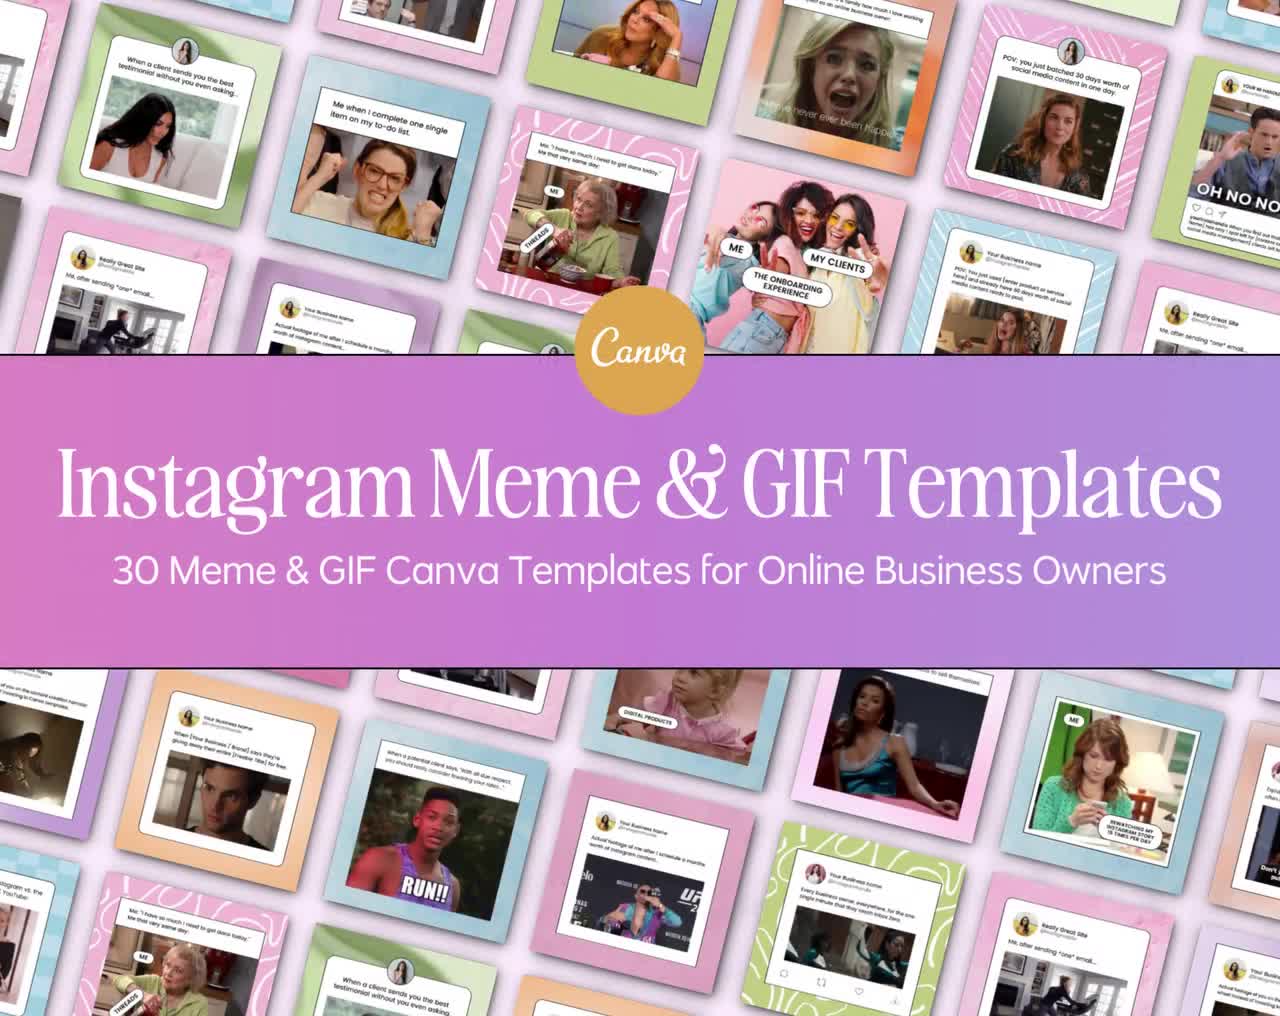 How to Make a GIF in Canva - Canva Templates